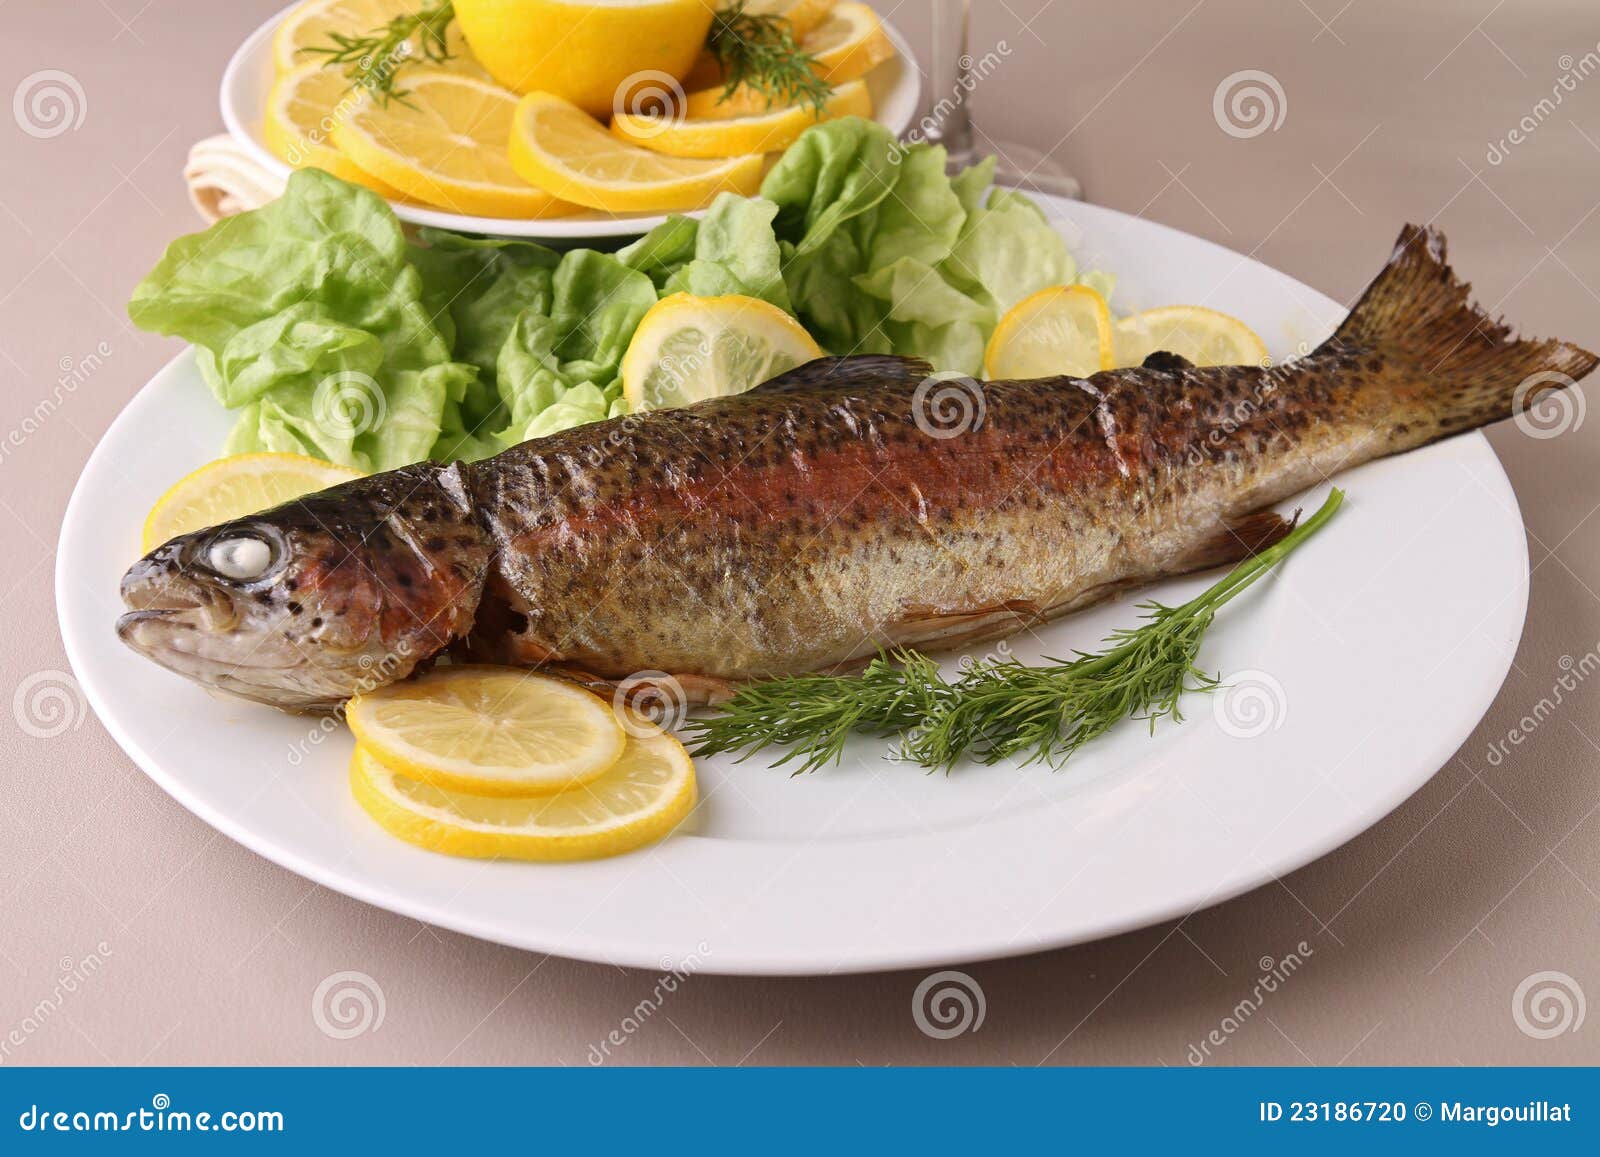 grilled-trout-23186720.jpg